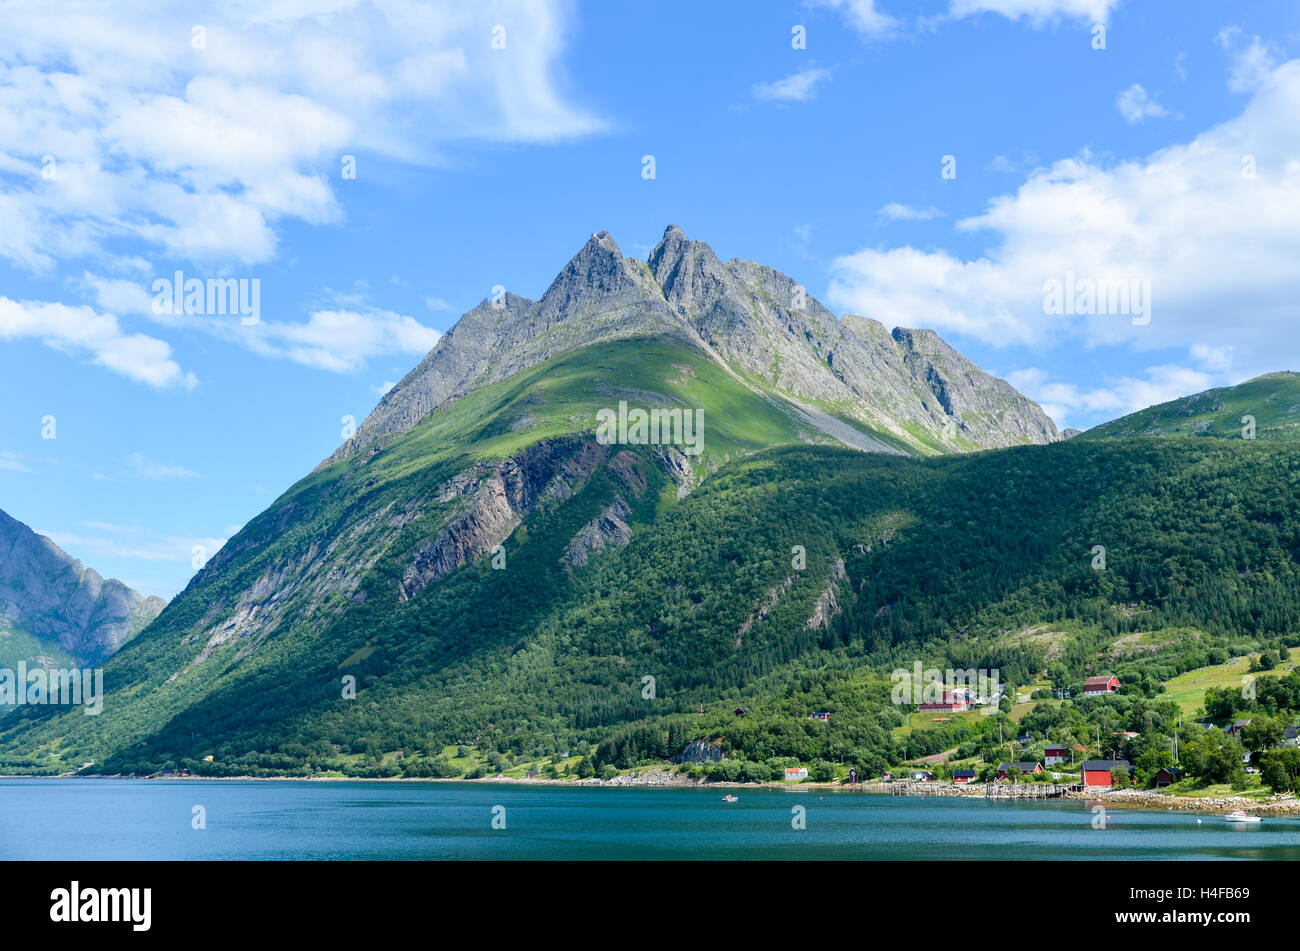 Northern Norway outdoors, fjords and mountains (Liatinden) Stock Photo